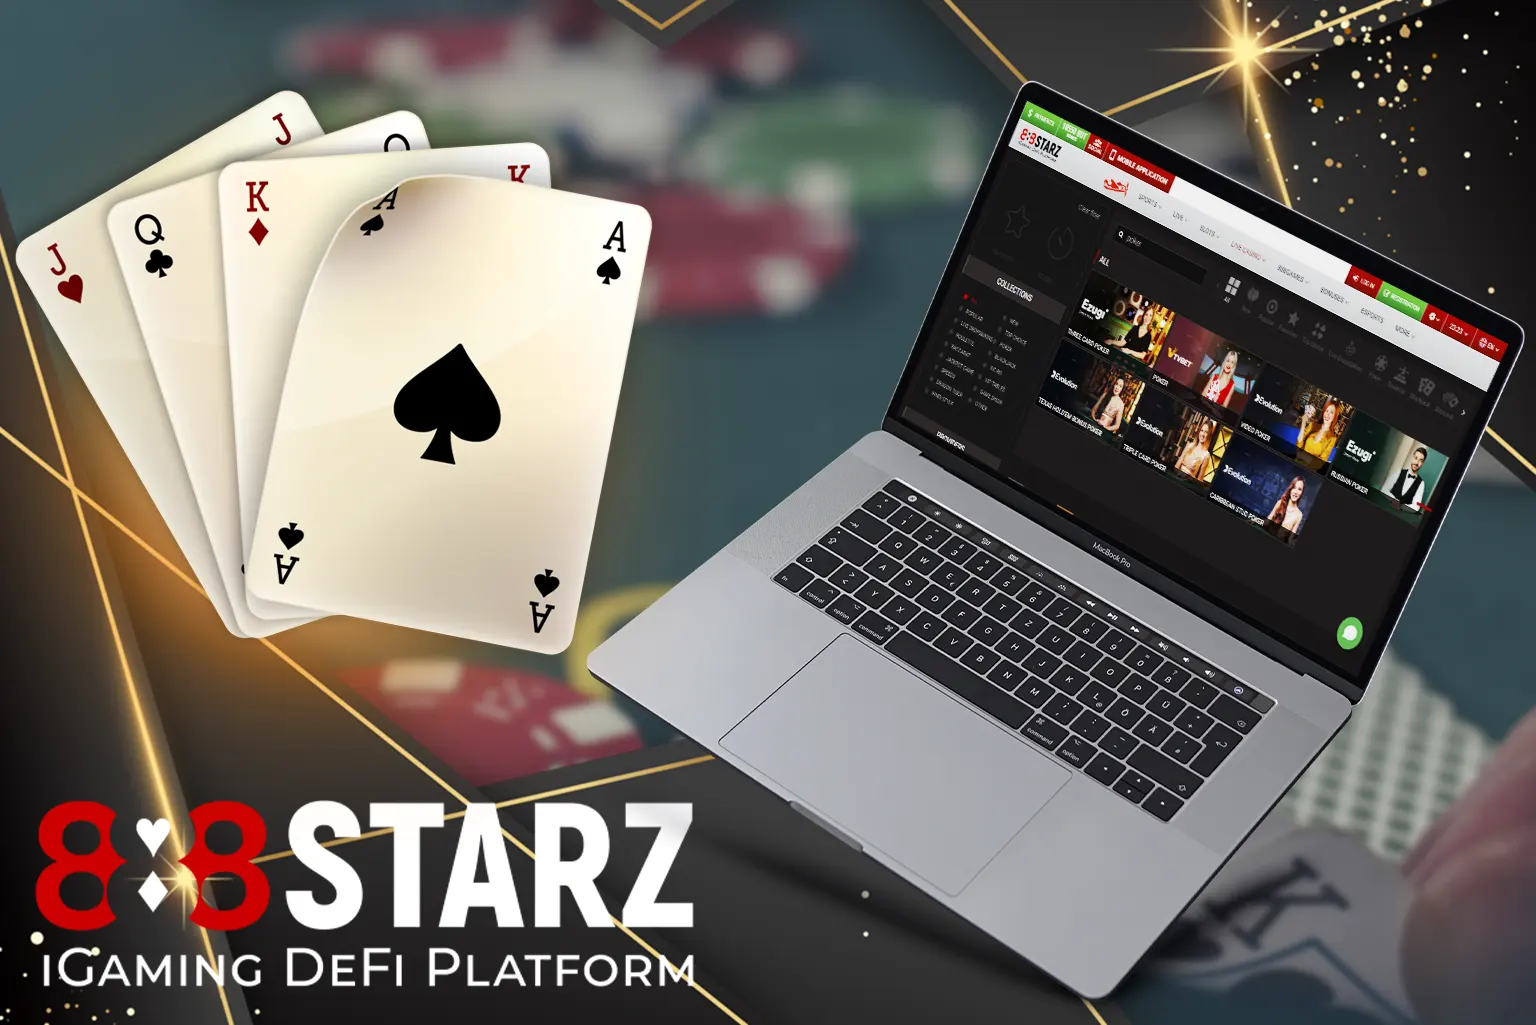 Players from Bangladesh can enjoy an enjoyable gaming experience in this wonderful online poker game at 888starz.